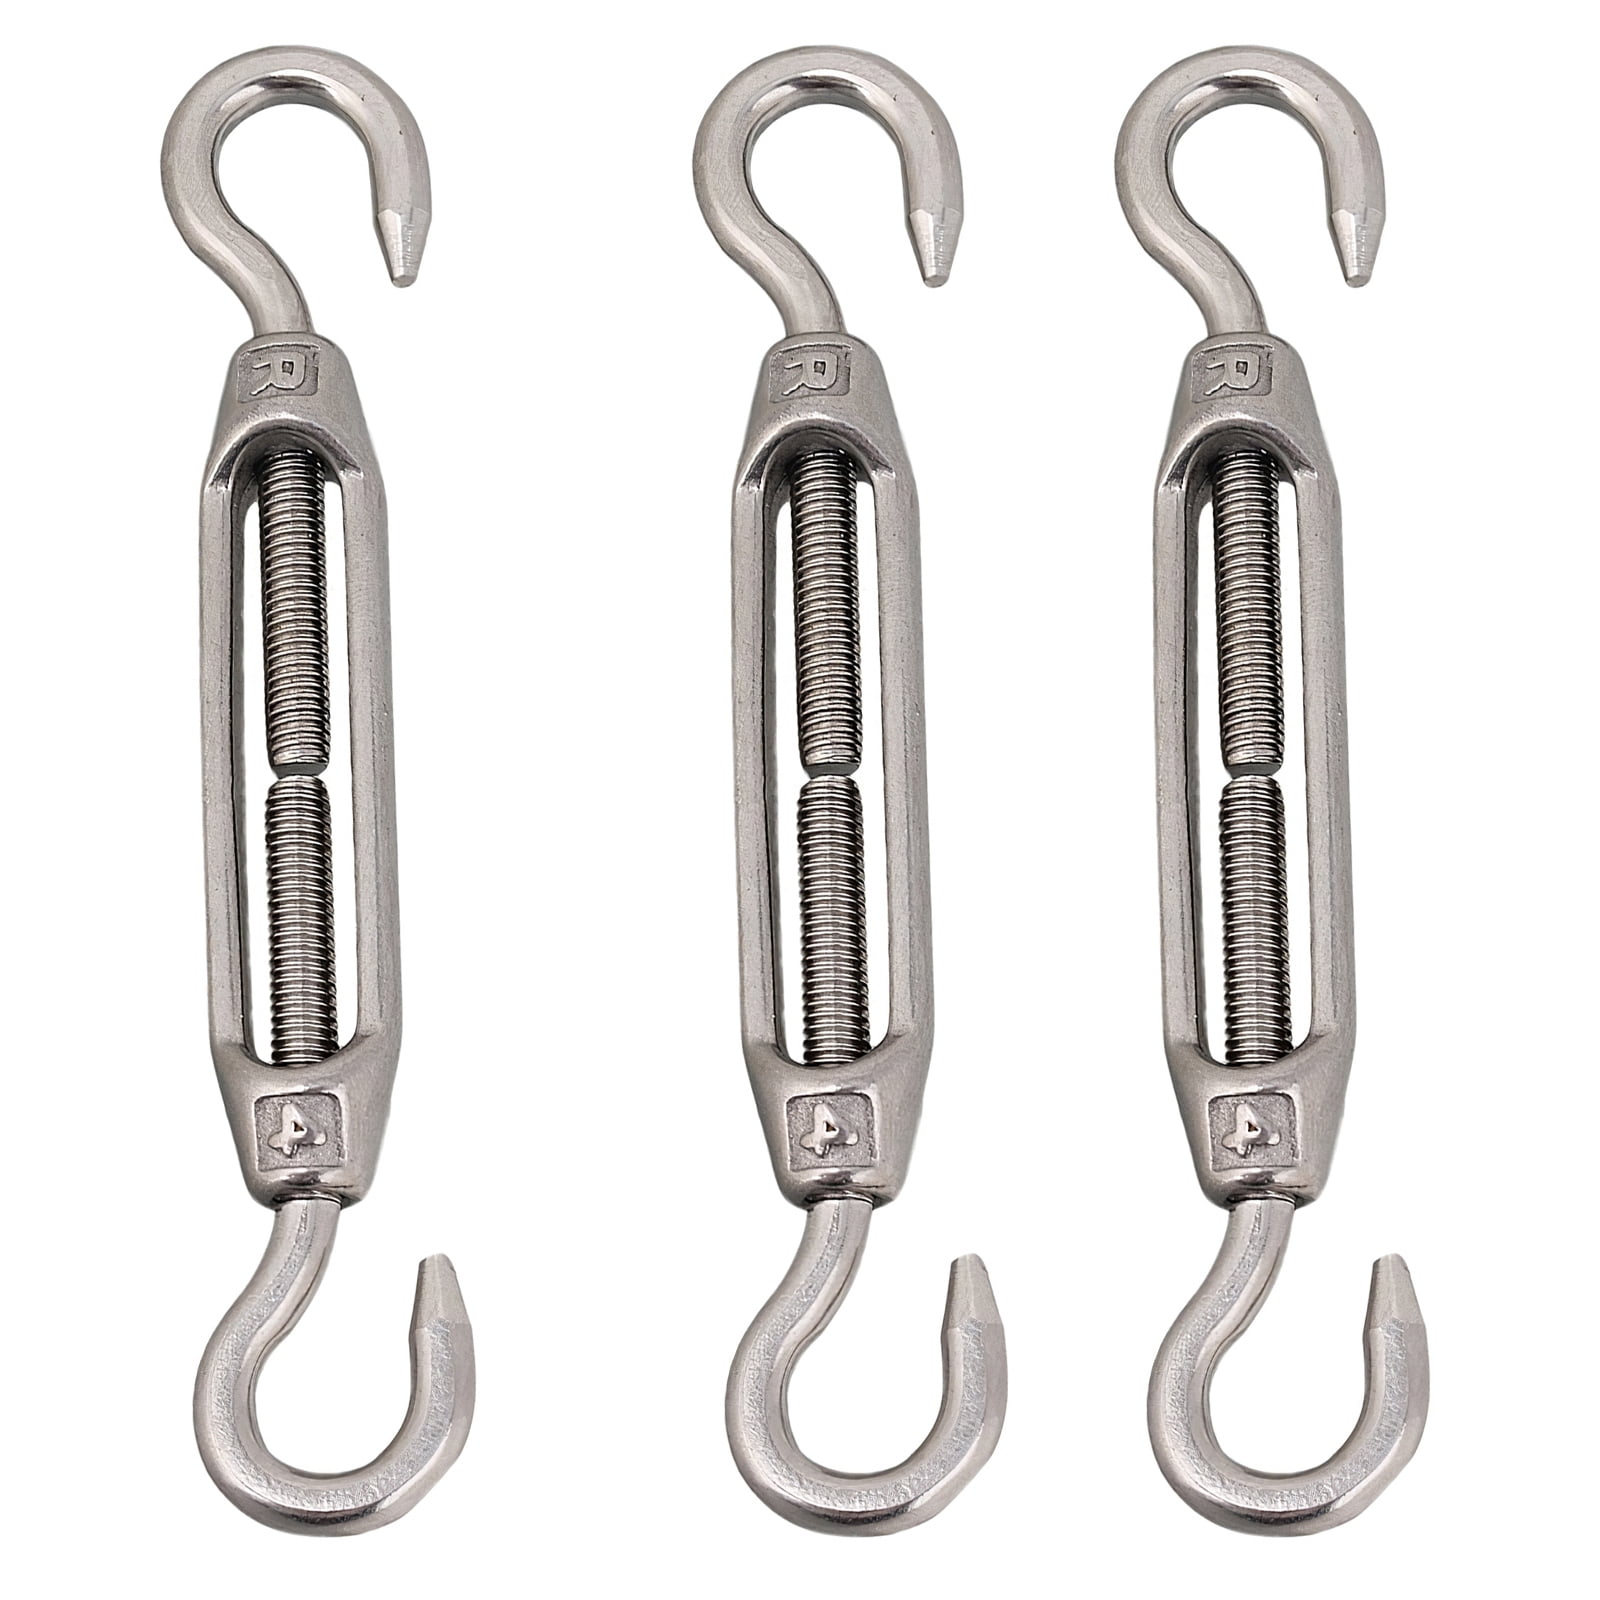 M10 Stainless Steel Turnbuckle Wire Rope Tensioner Adjustable 